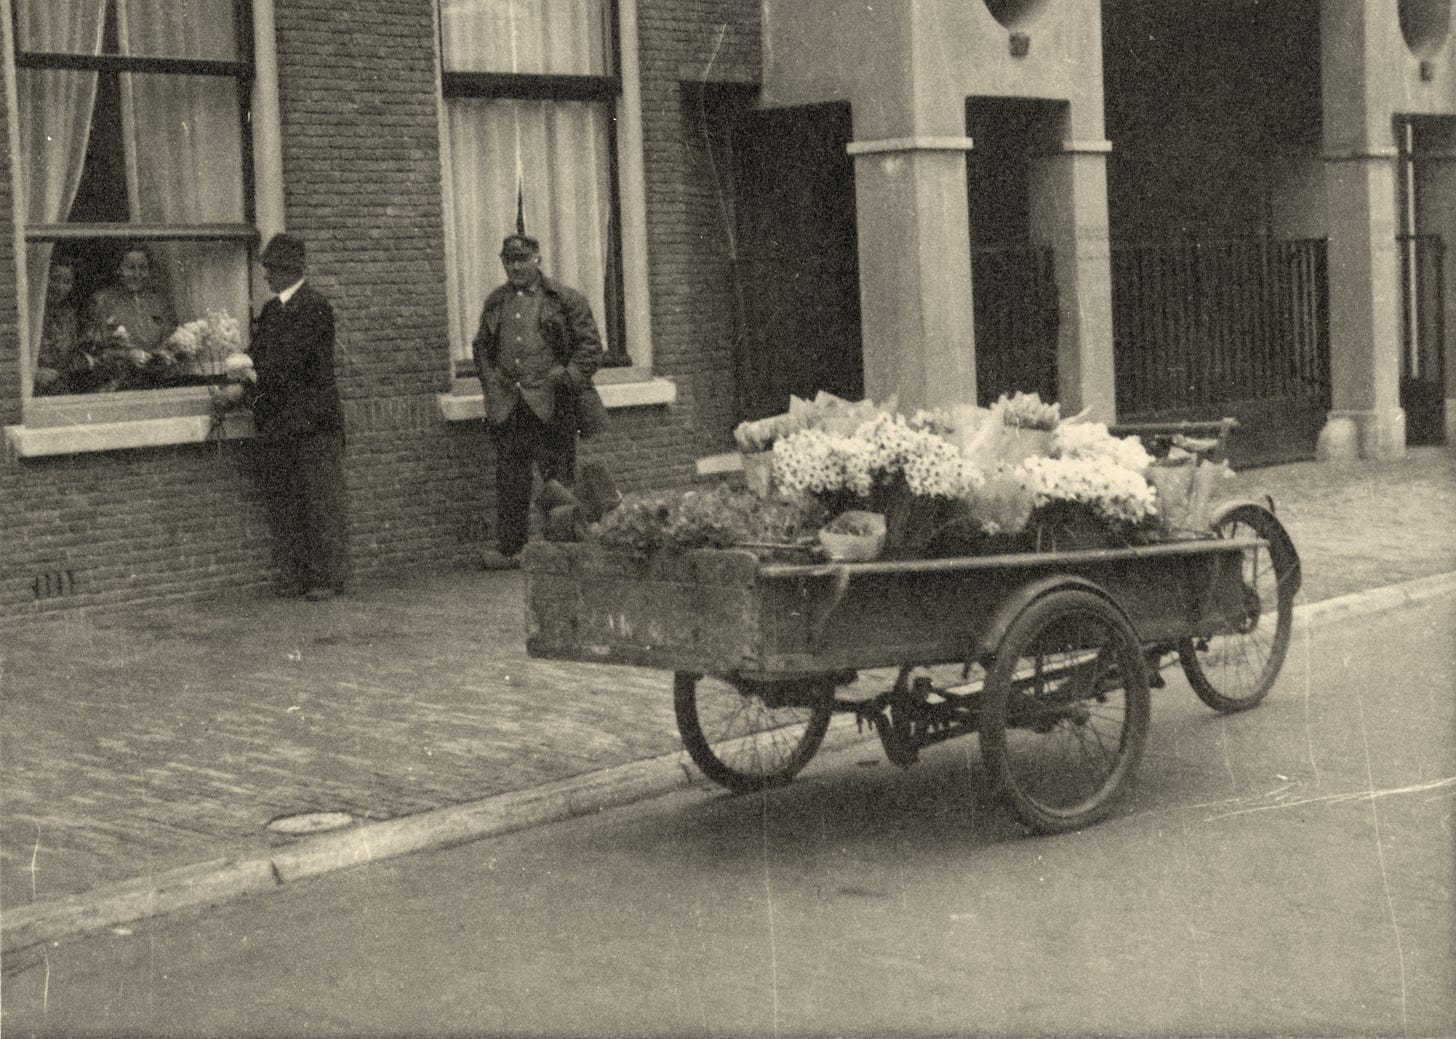 An old black and white photo showing a cargobike covered in flowers which are being sold.